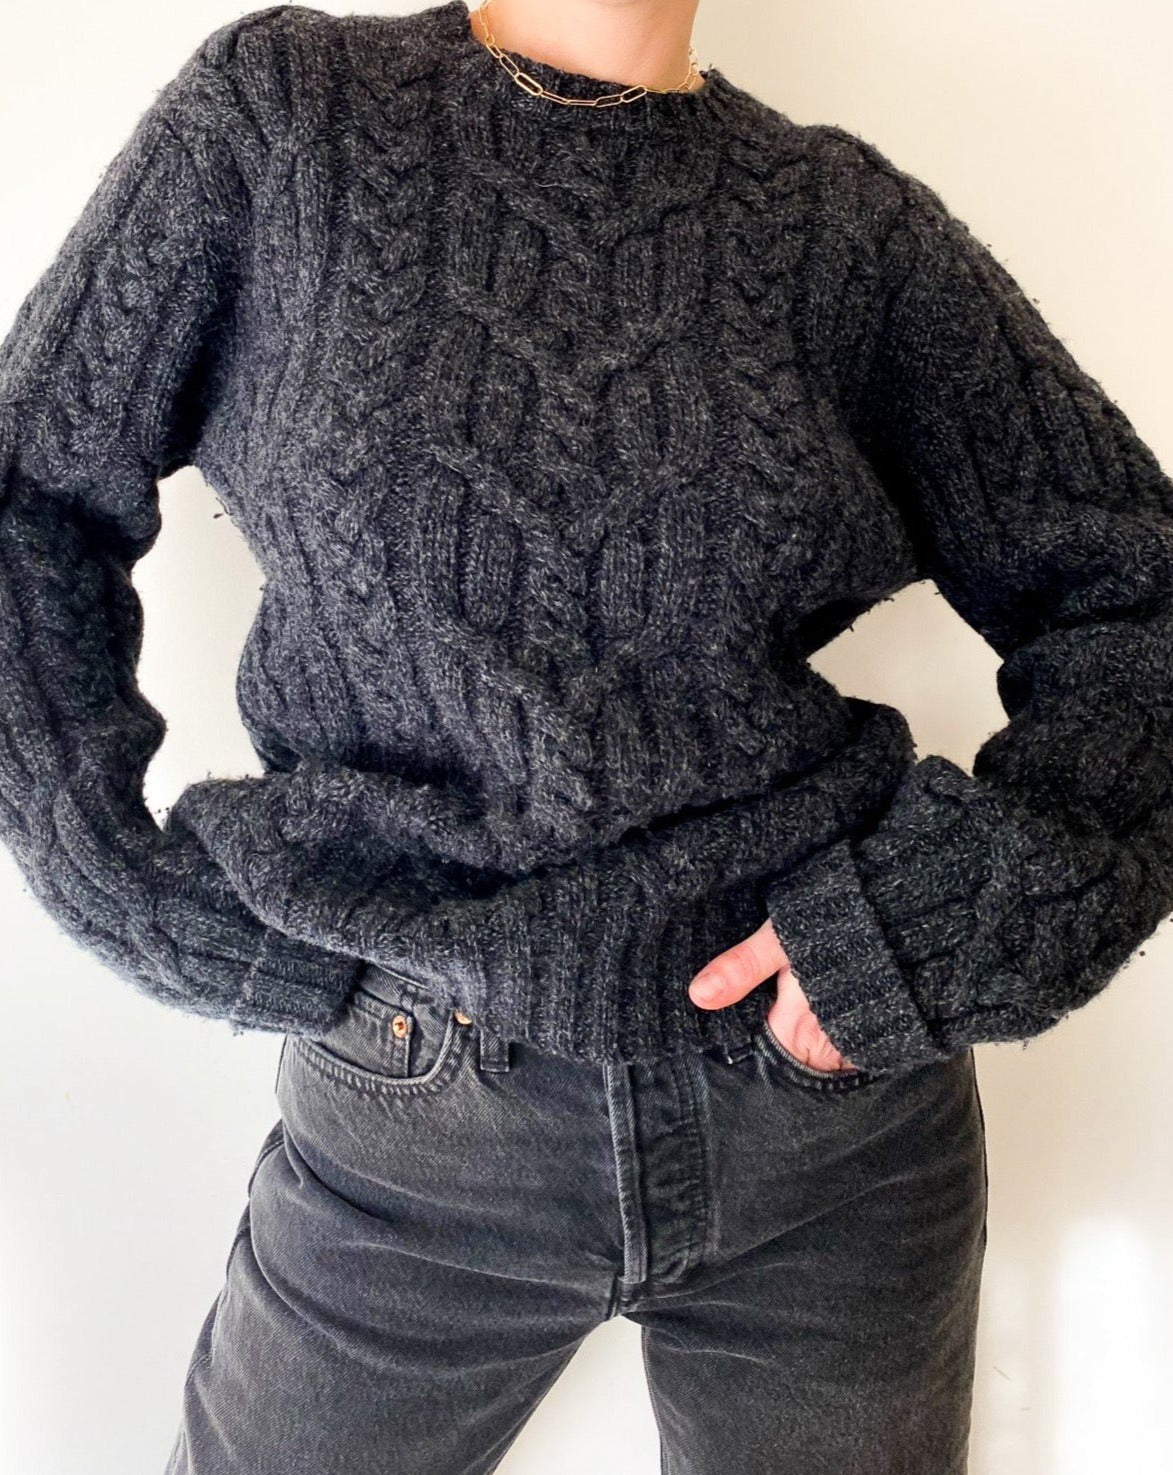 Vintage Charcoal Cable-Knit Sweater